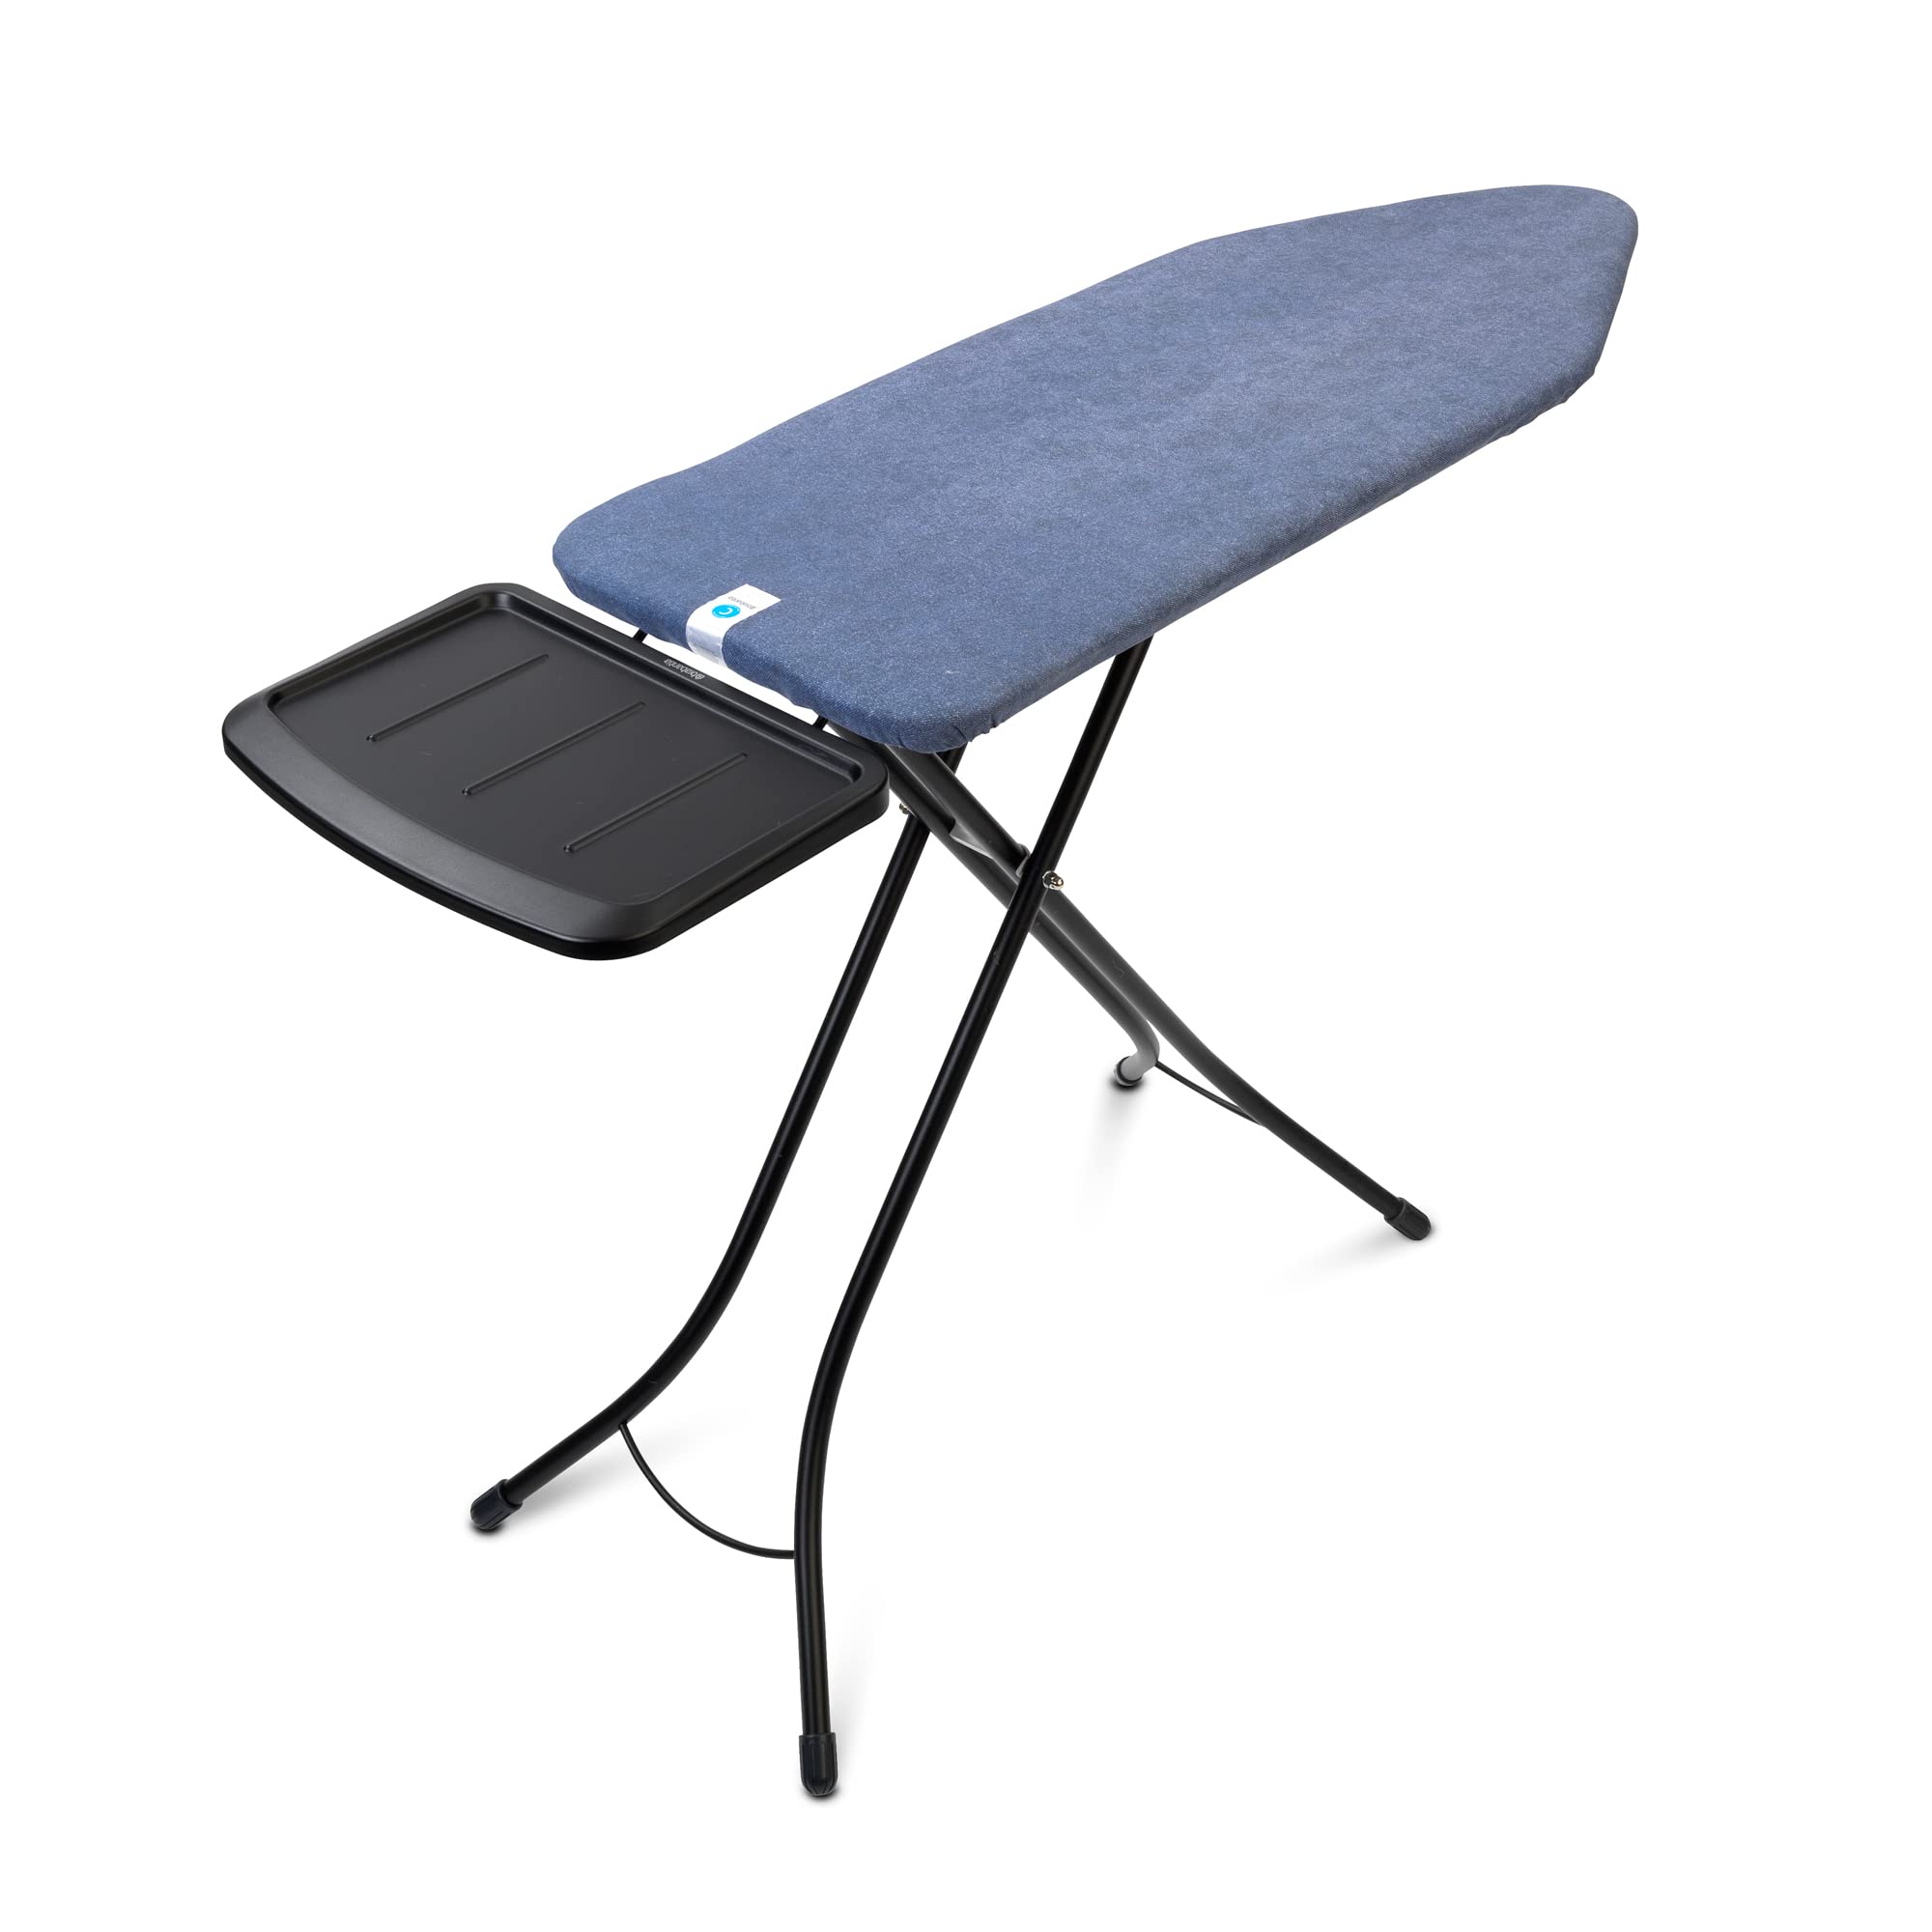 Brabantia - Ironing Board C - Extra Large Steam Iron Rest - Adjustable in Height - Non-Slip Rubber Feet - Cotton Cover with Foam Layer - Foldable XL Unit - Denim Blue - 49 x 18 inches